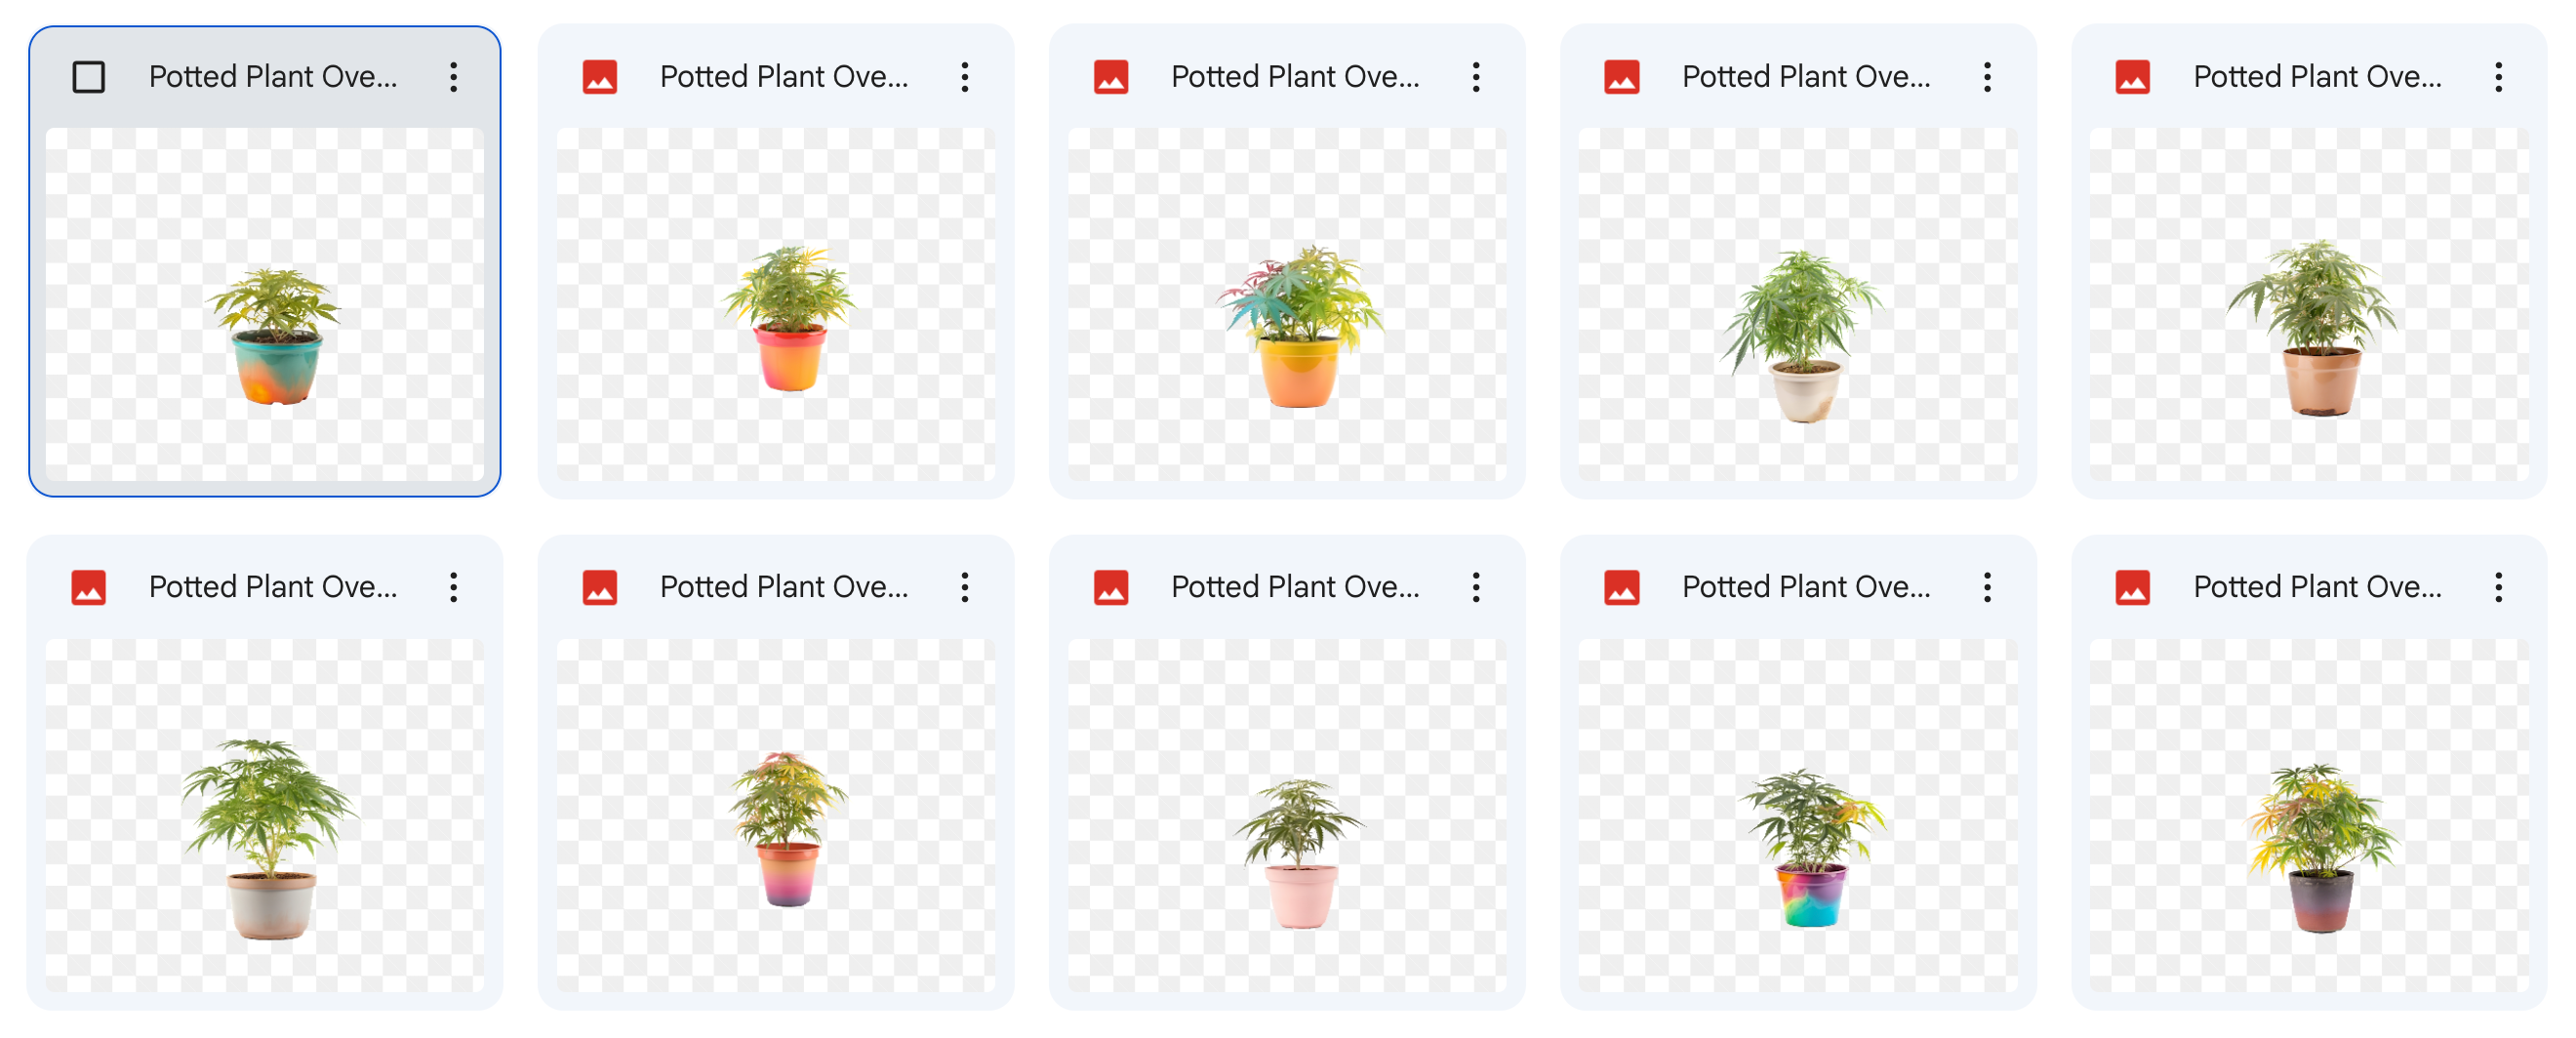 Magical Weed Potted Plants - Meg Bitton Productions